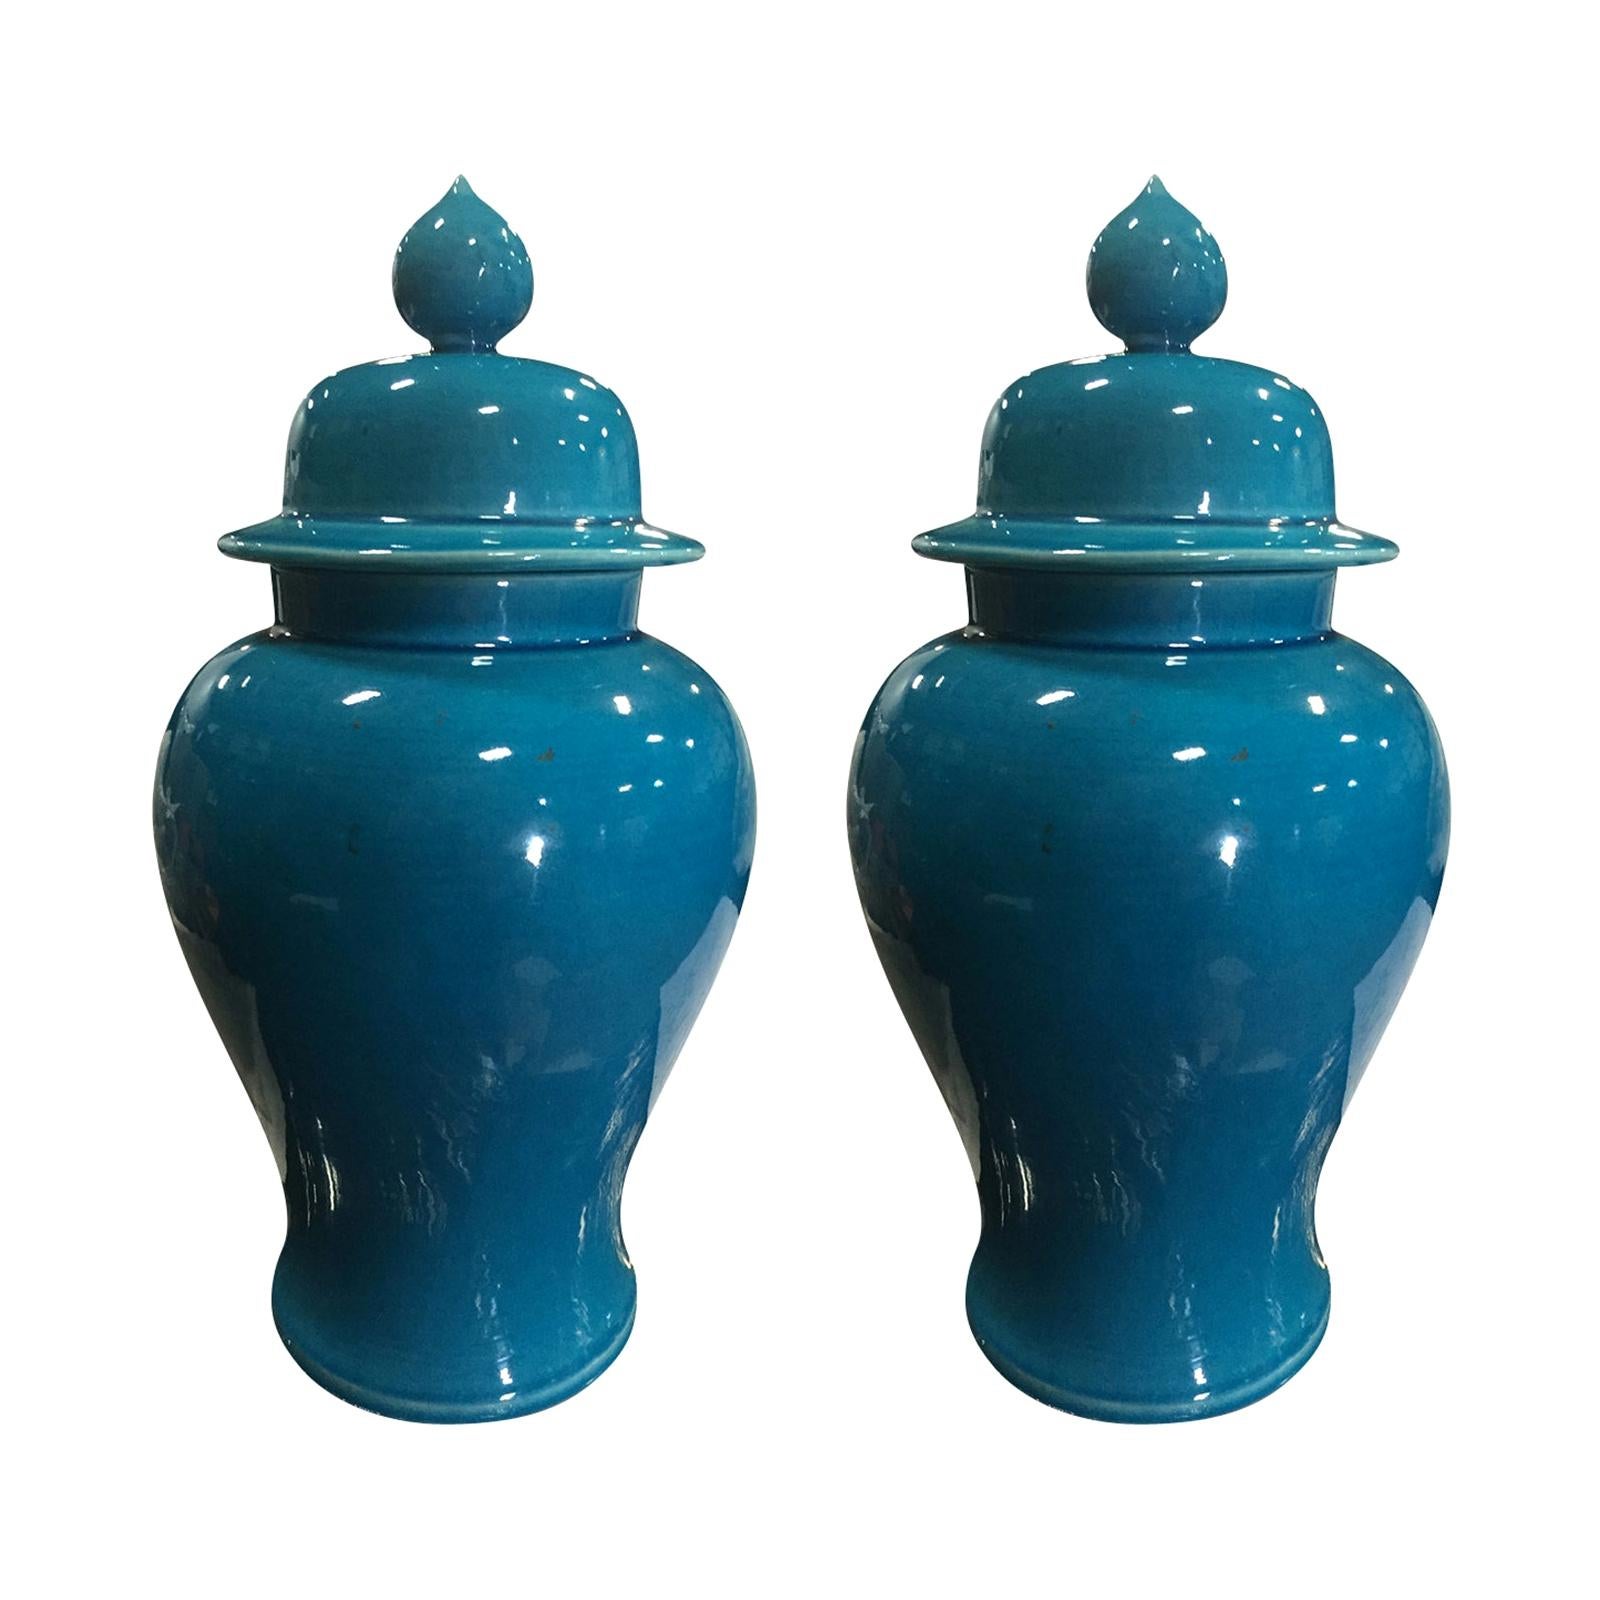 Pair of 20th Century Chinese Blue Porcelain Lidded Jars